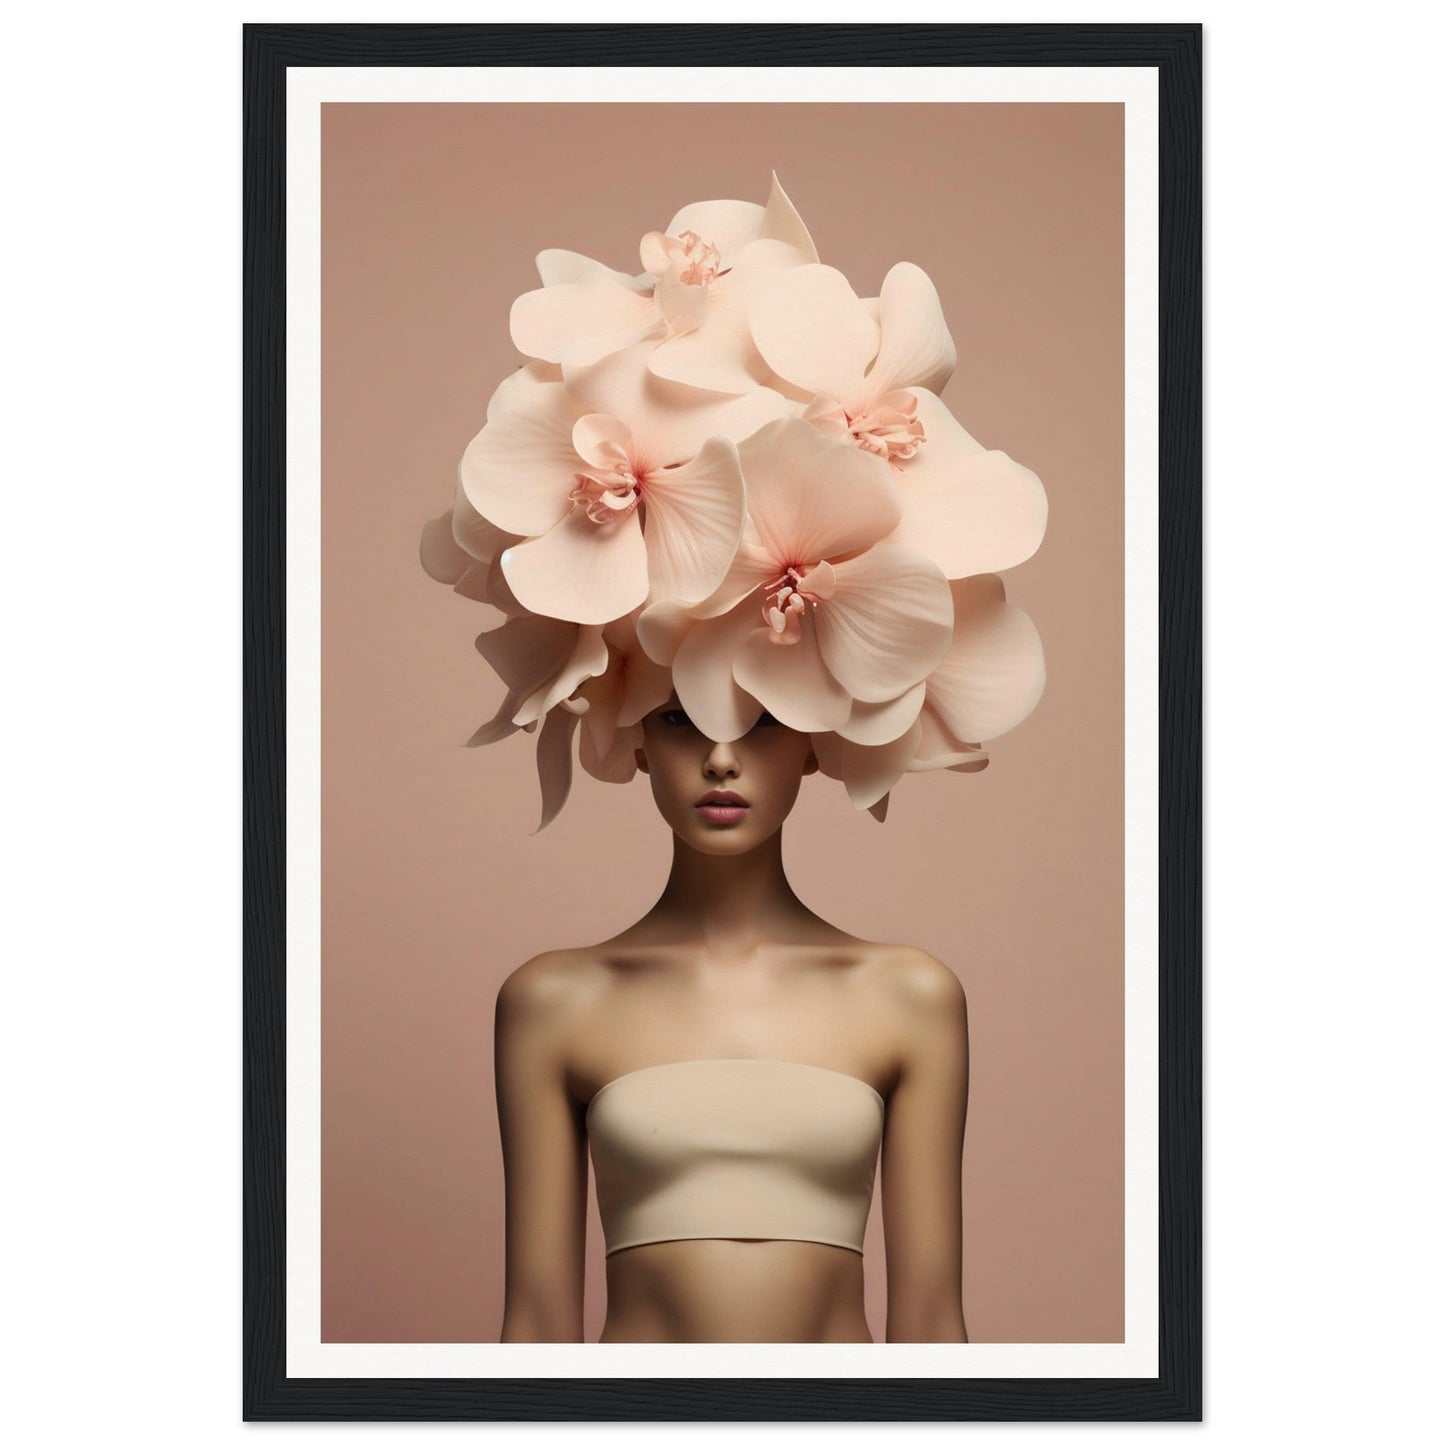 Flower head #14 the oracle windows™ collection - 30x45 cm /